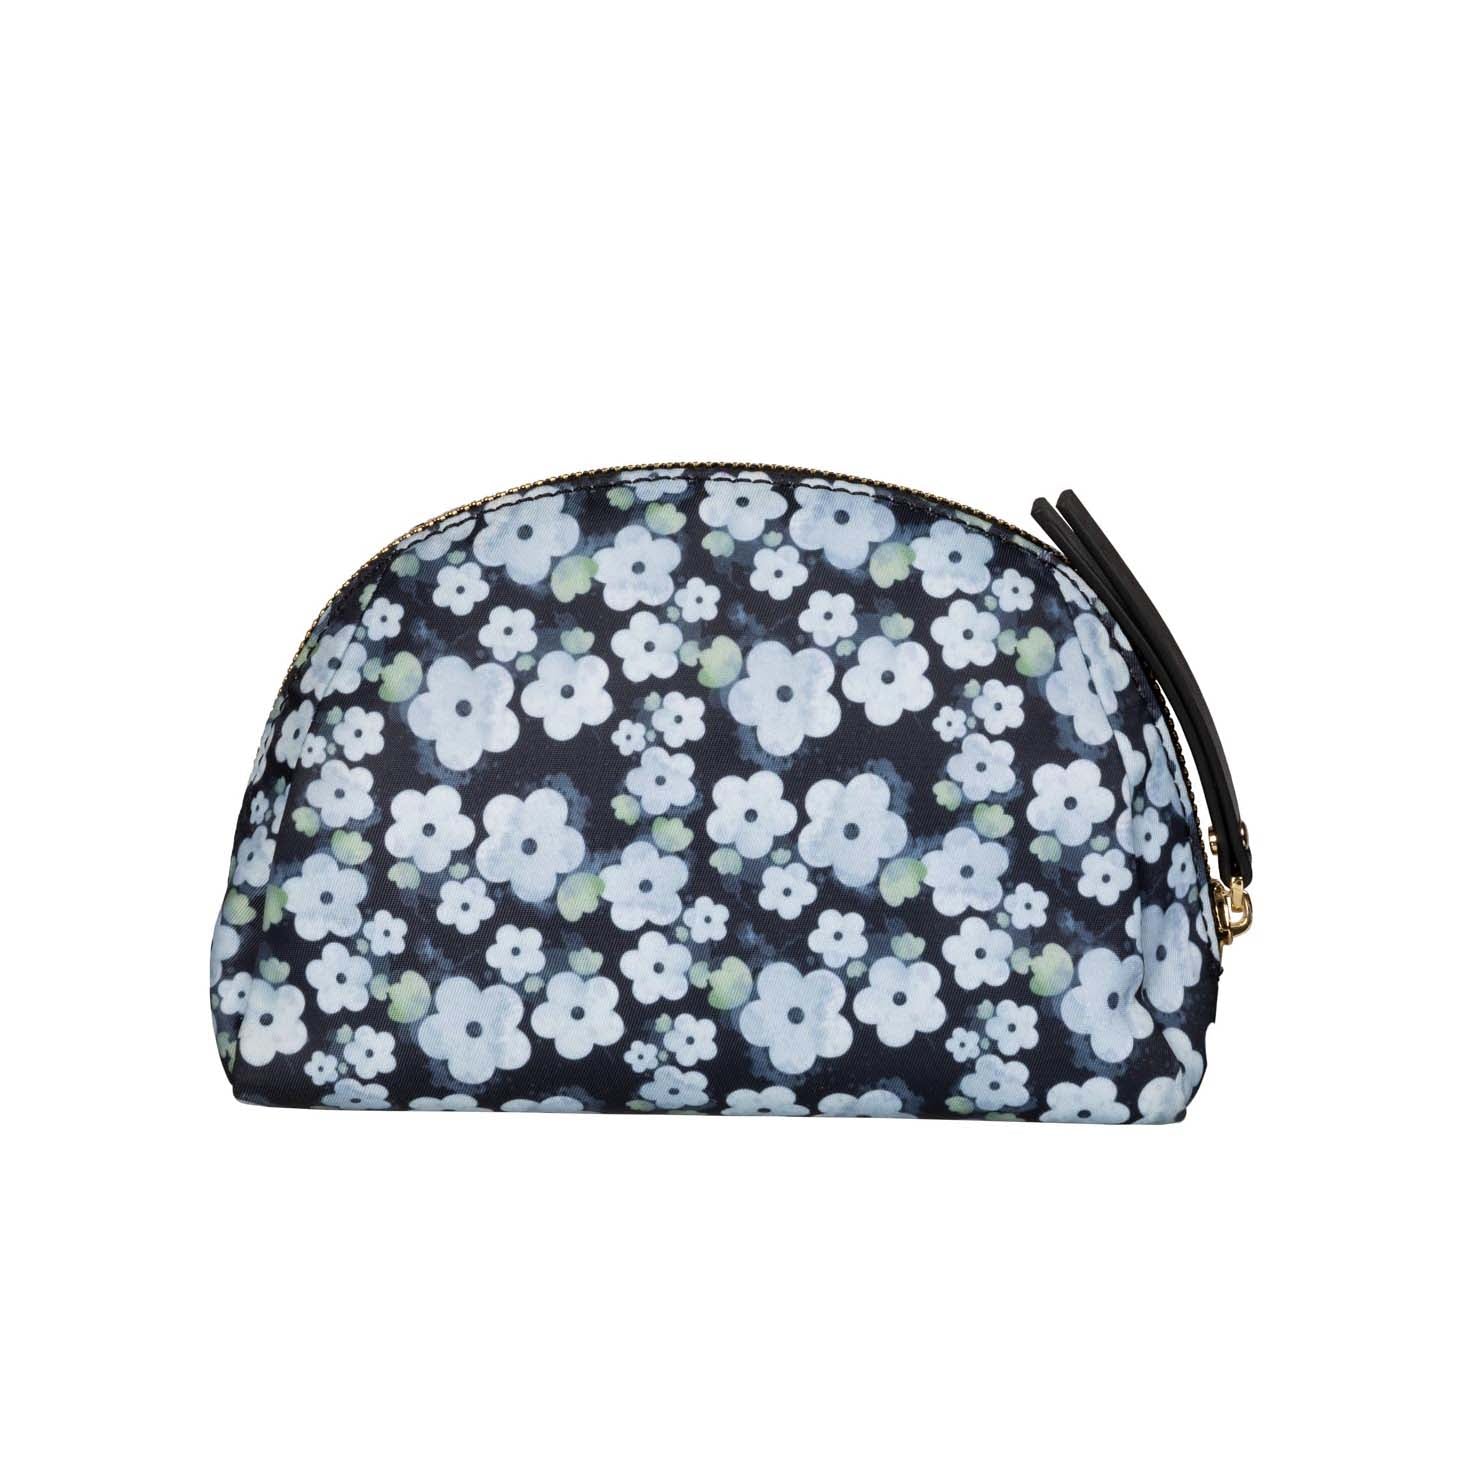 Inka cosmetic bag, forget-me-not